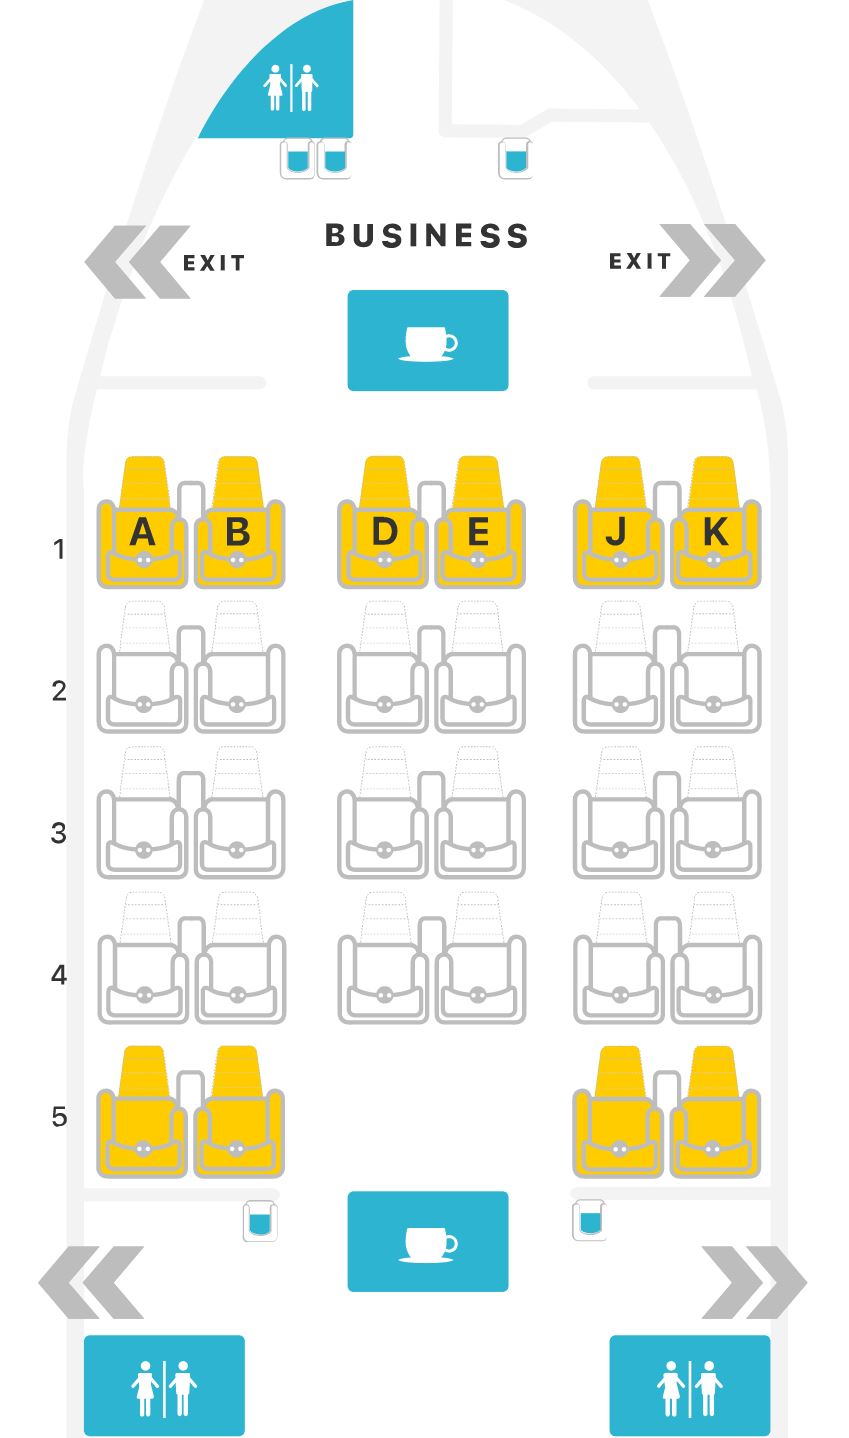 Turkish Airlines A330-300 business class seat map